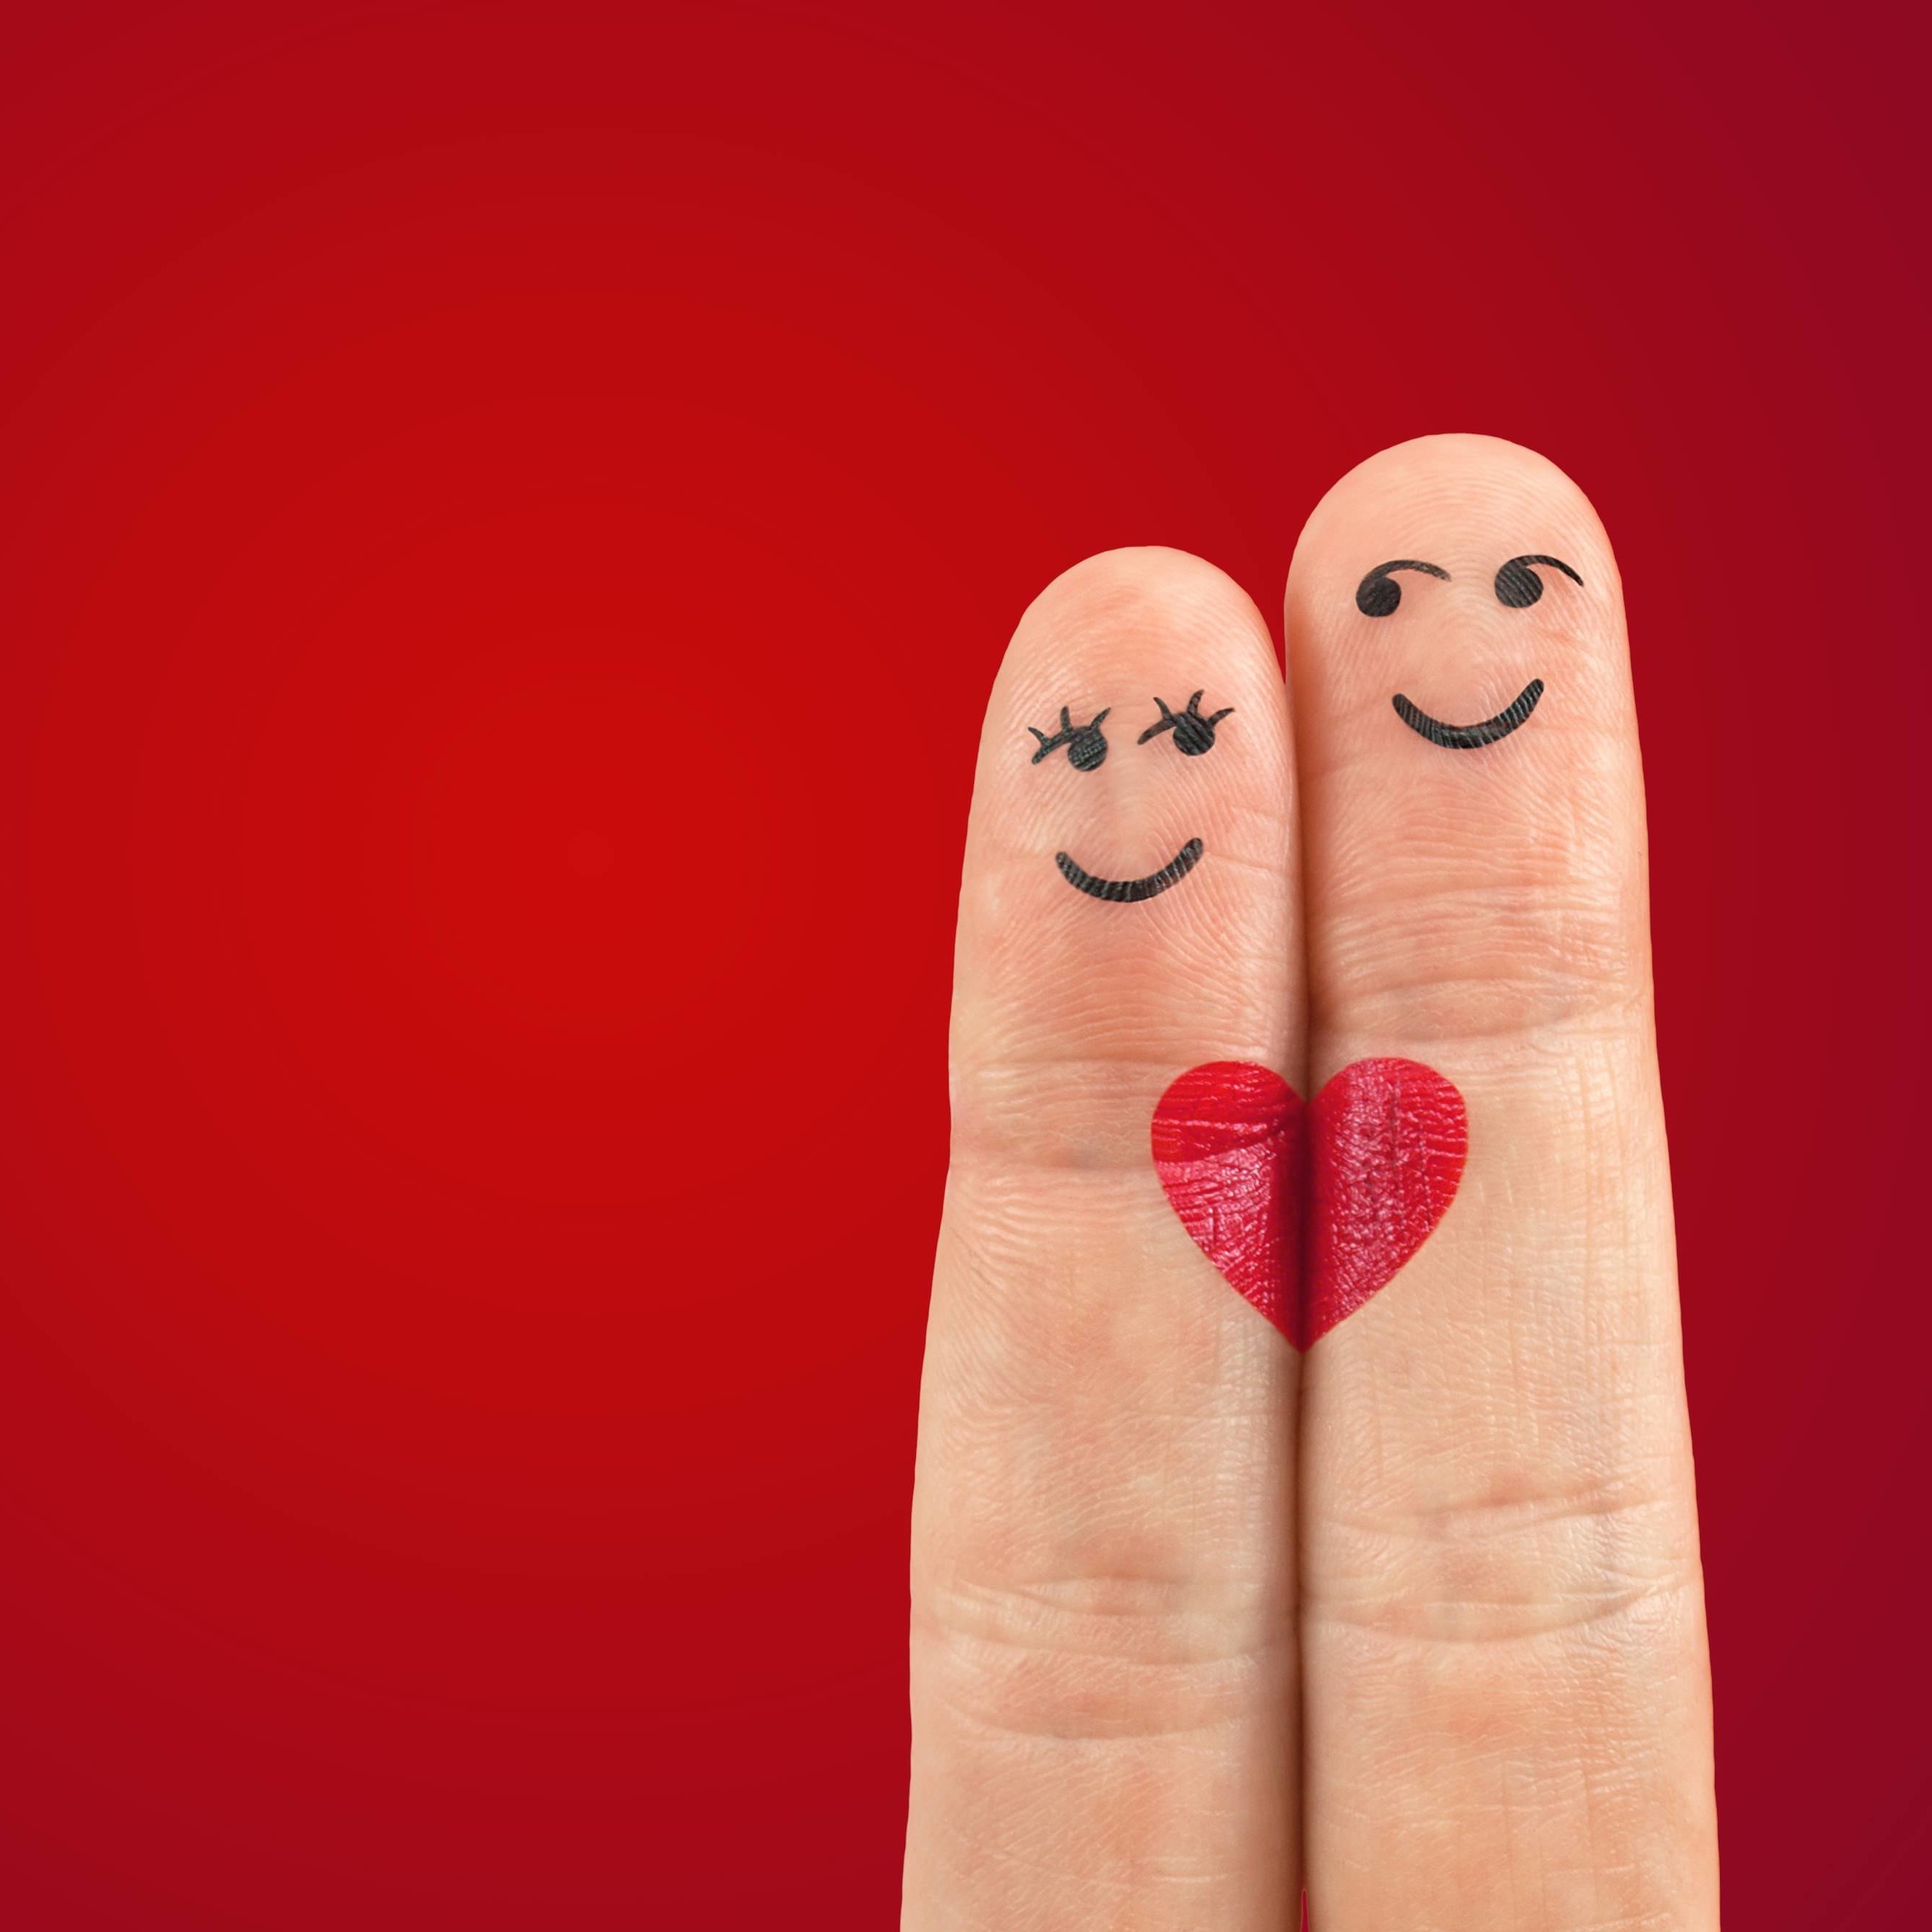 Fingers in Love Wallpaper for Apple iPhone 6 Plus